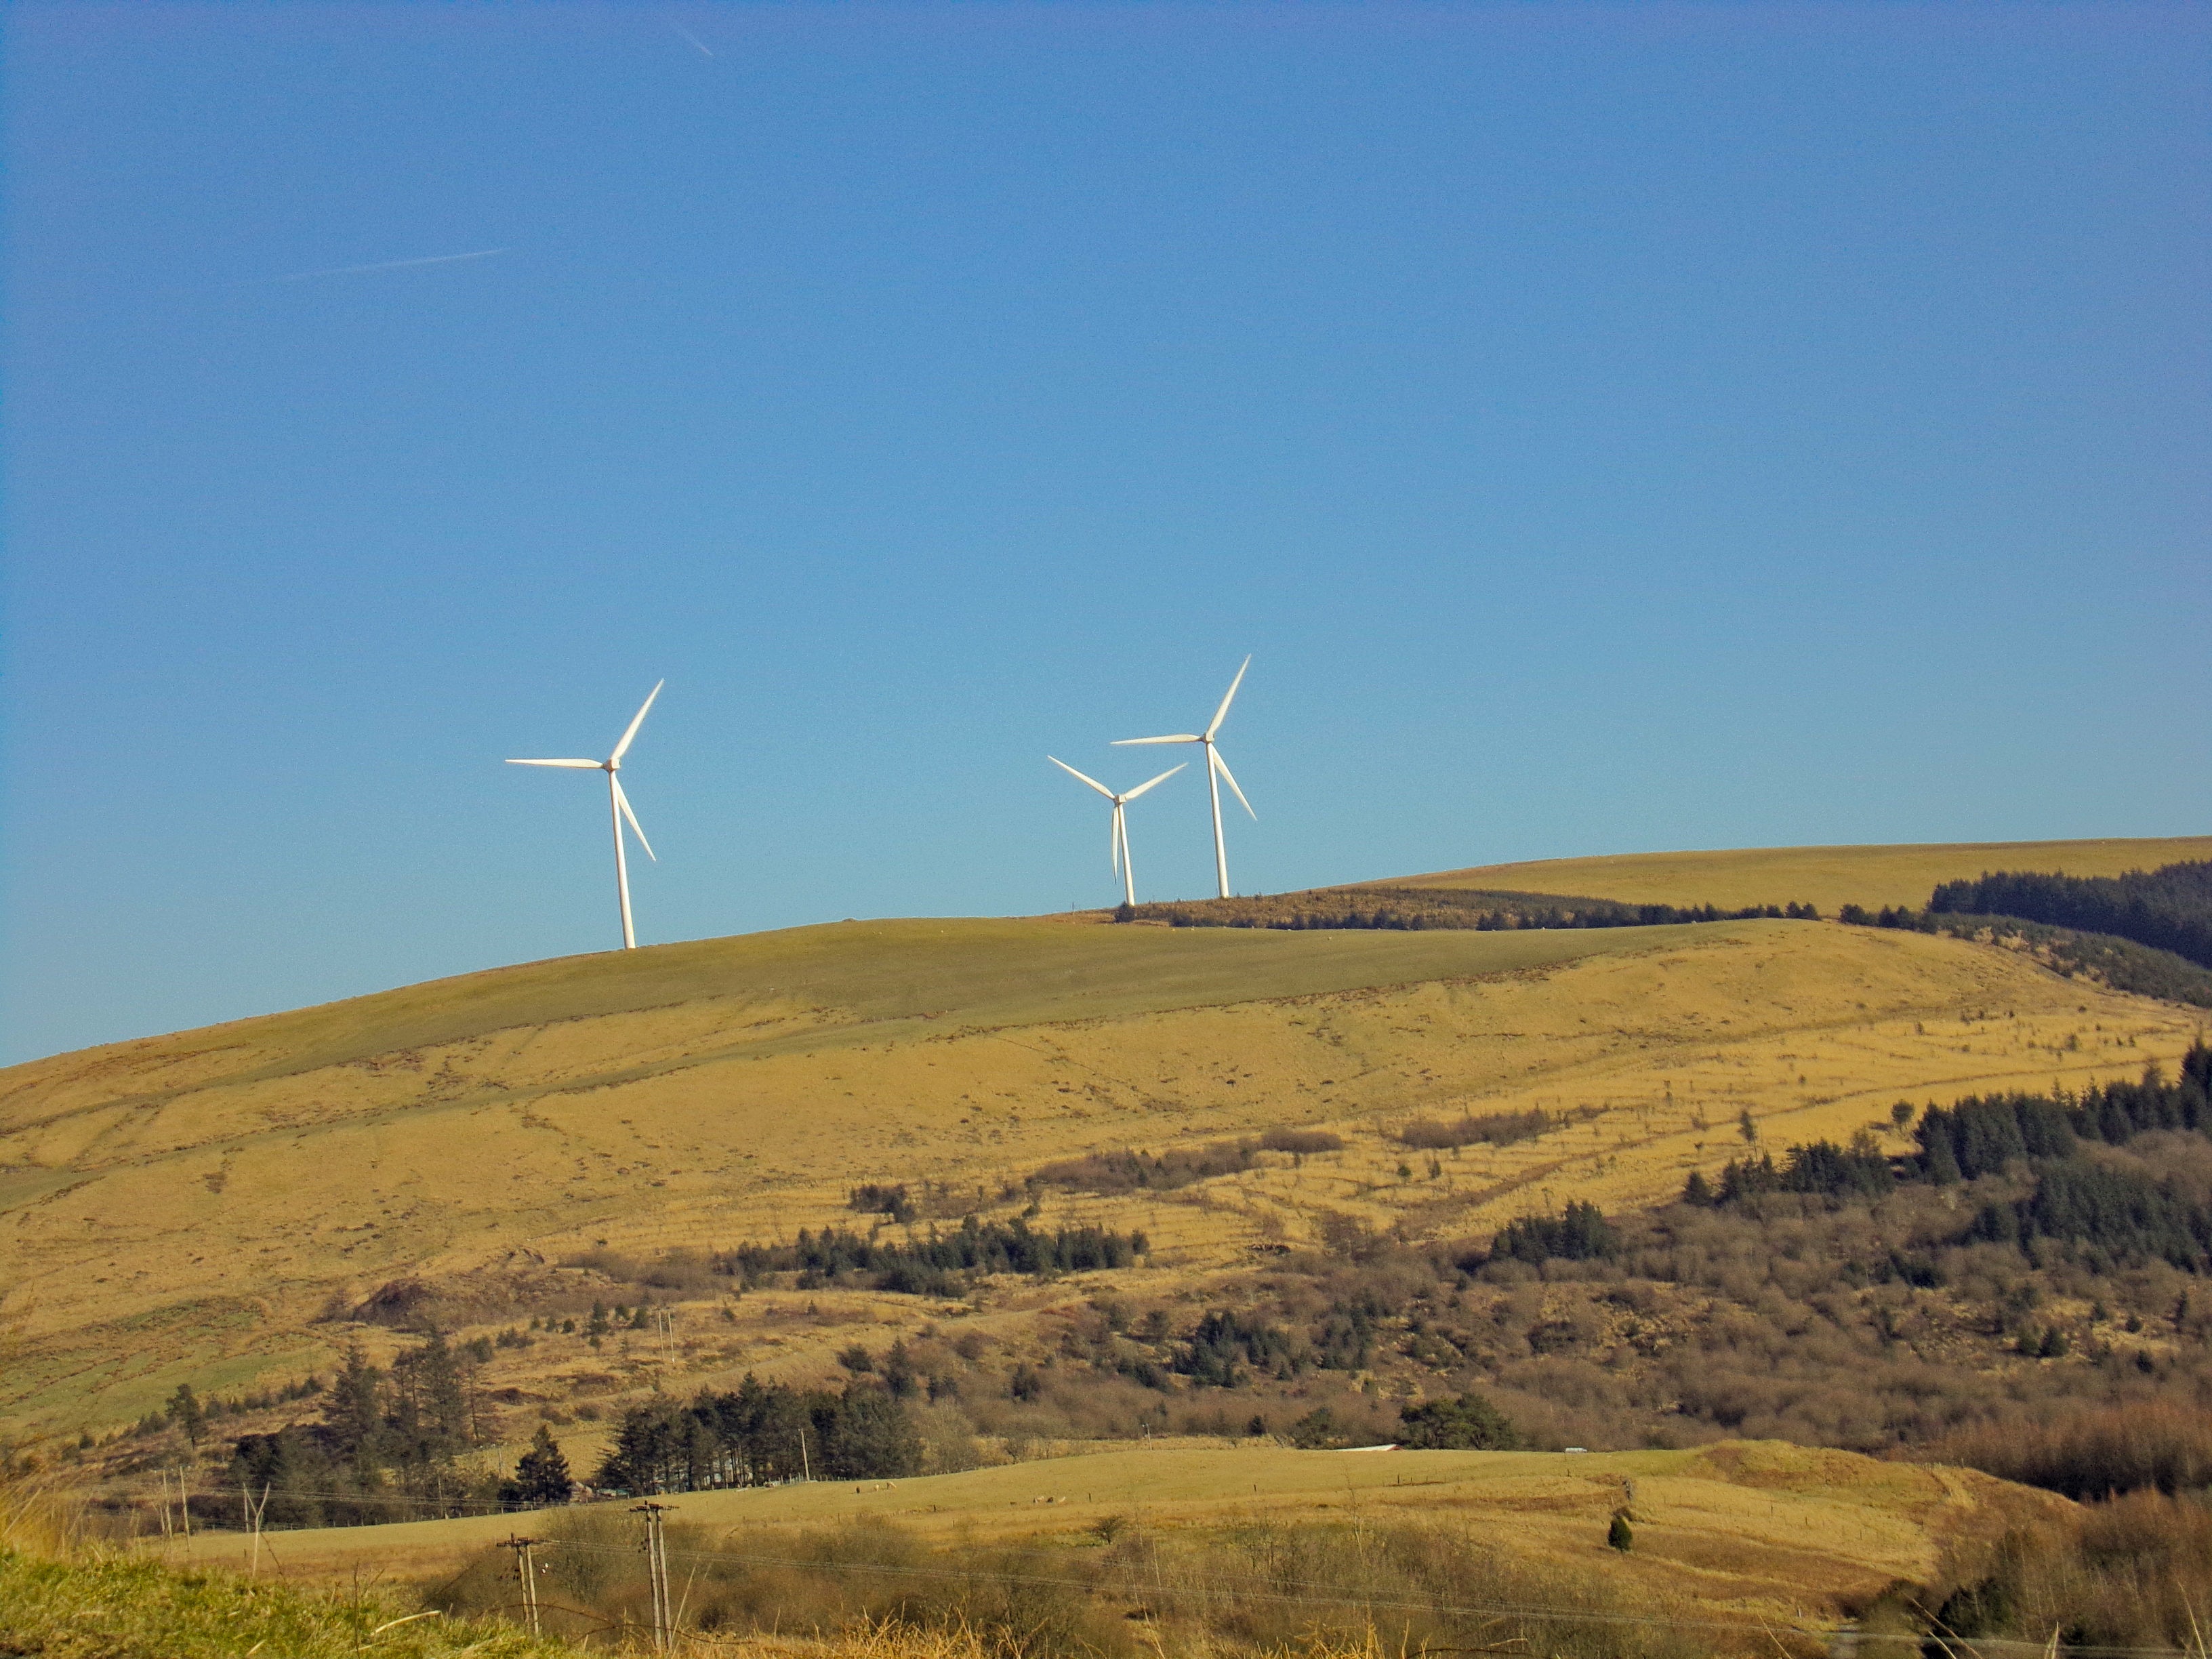 Three wind turbines are shown in a large field.